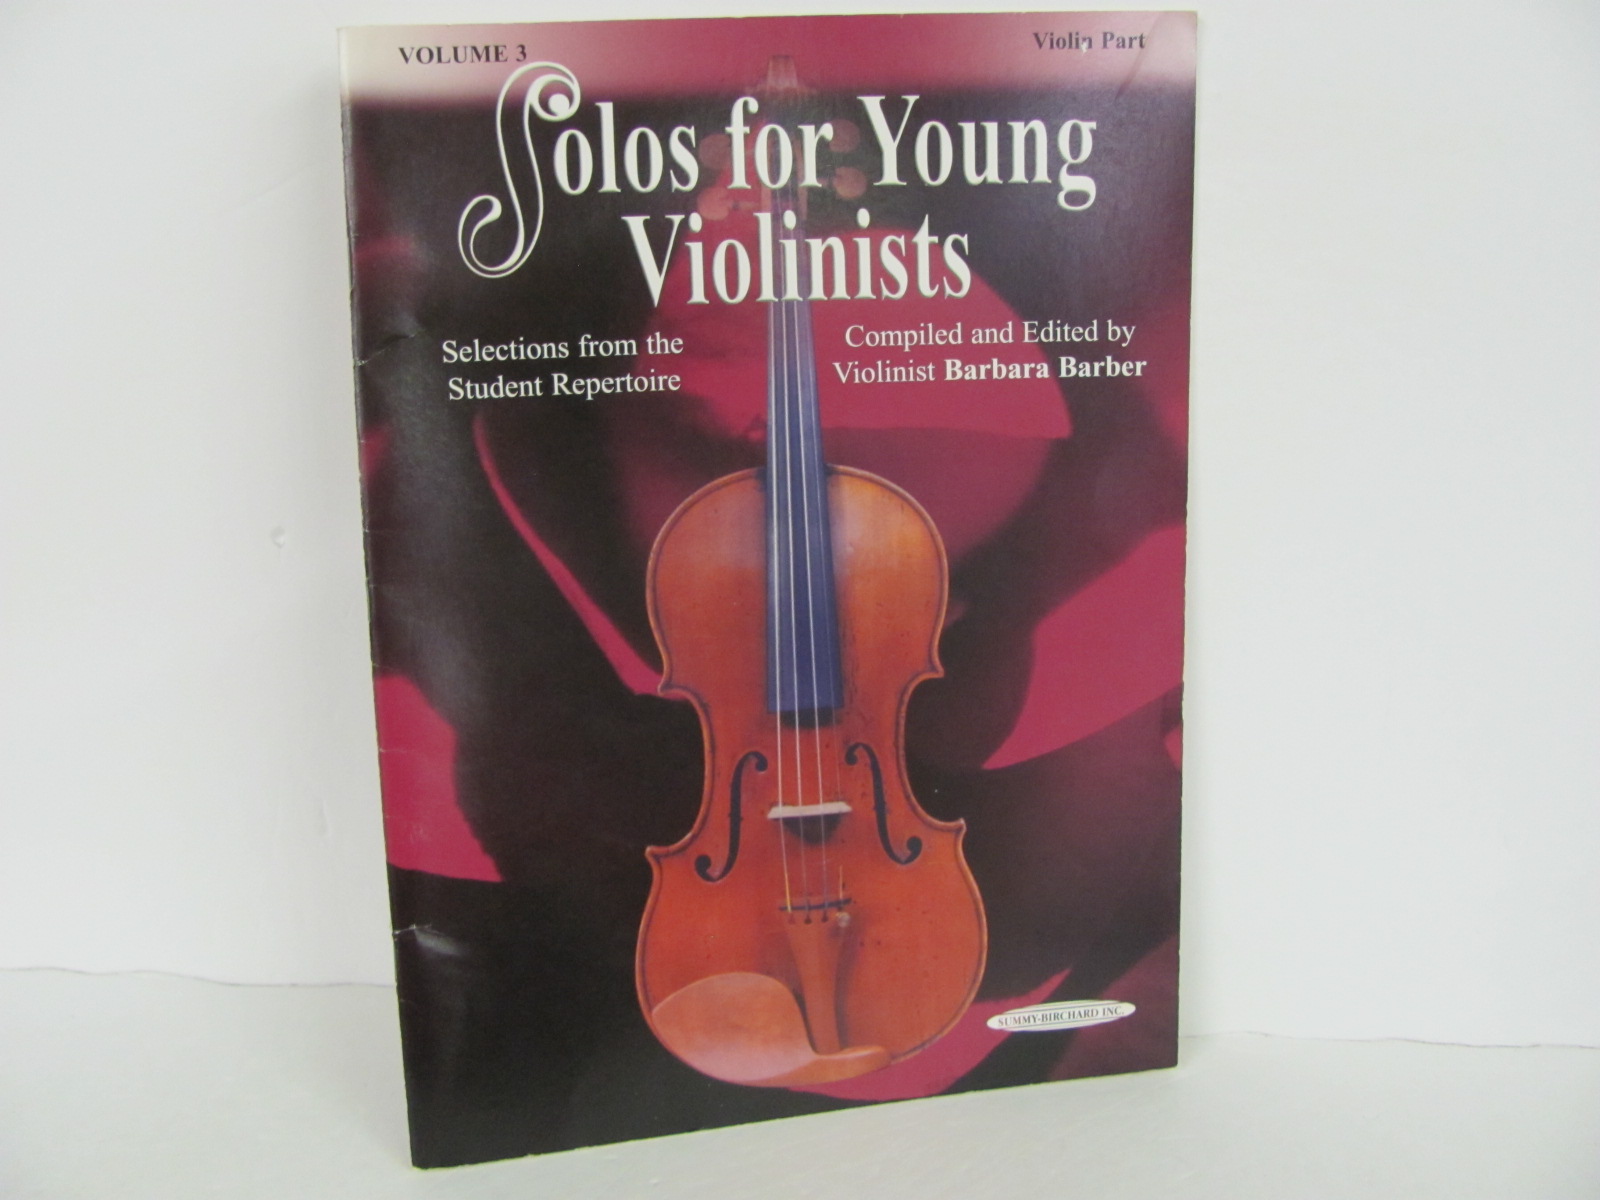 Solos-for-Young-Violinists-Summy-Birchard-Used-Volume-3-Music-Violin_343650A.jpg